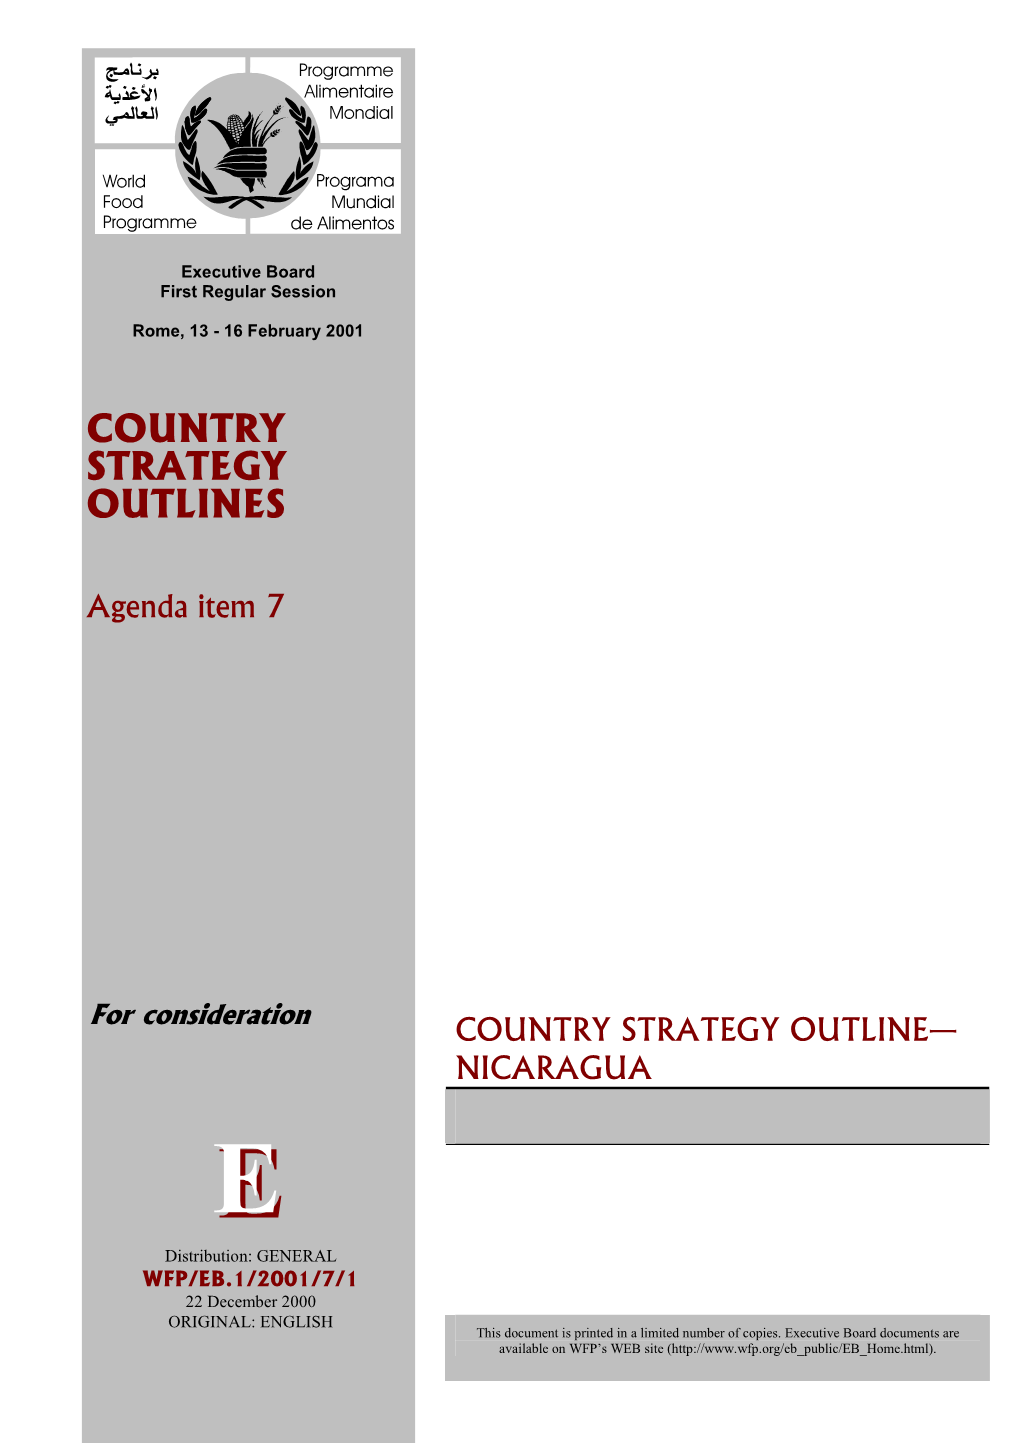 Country Strategy Outlines